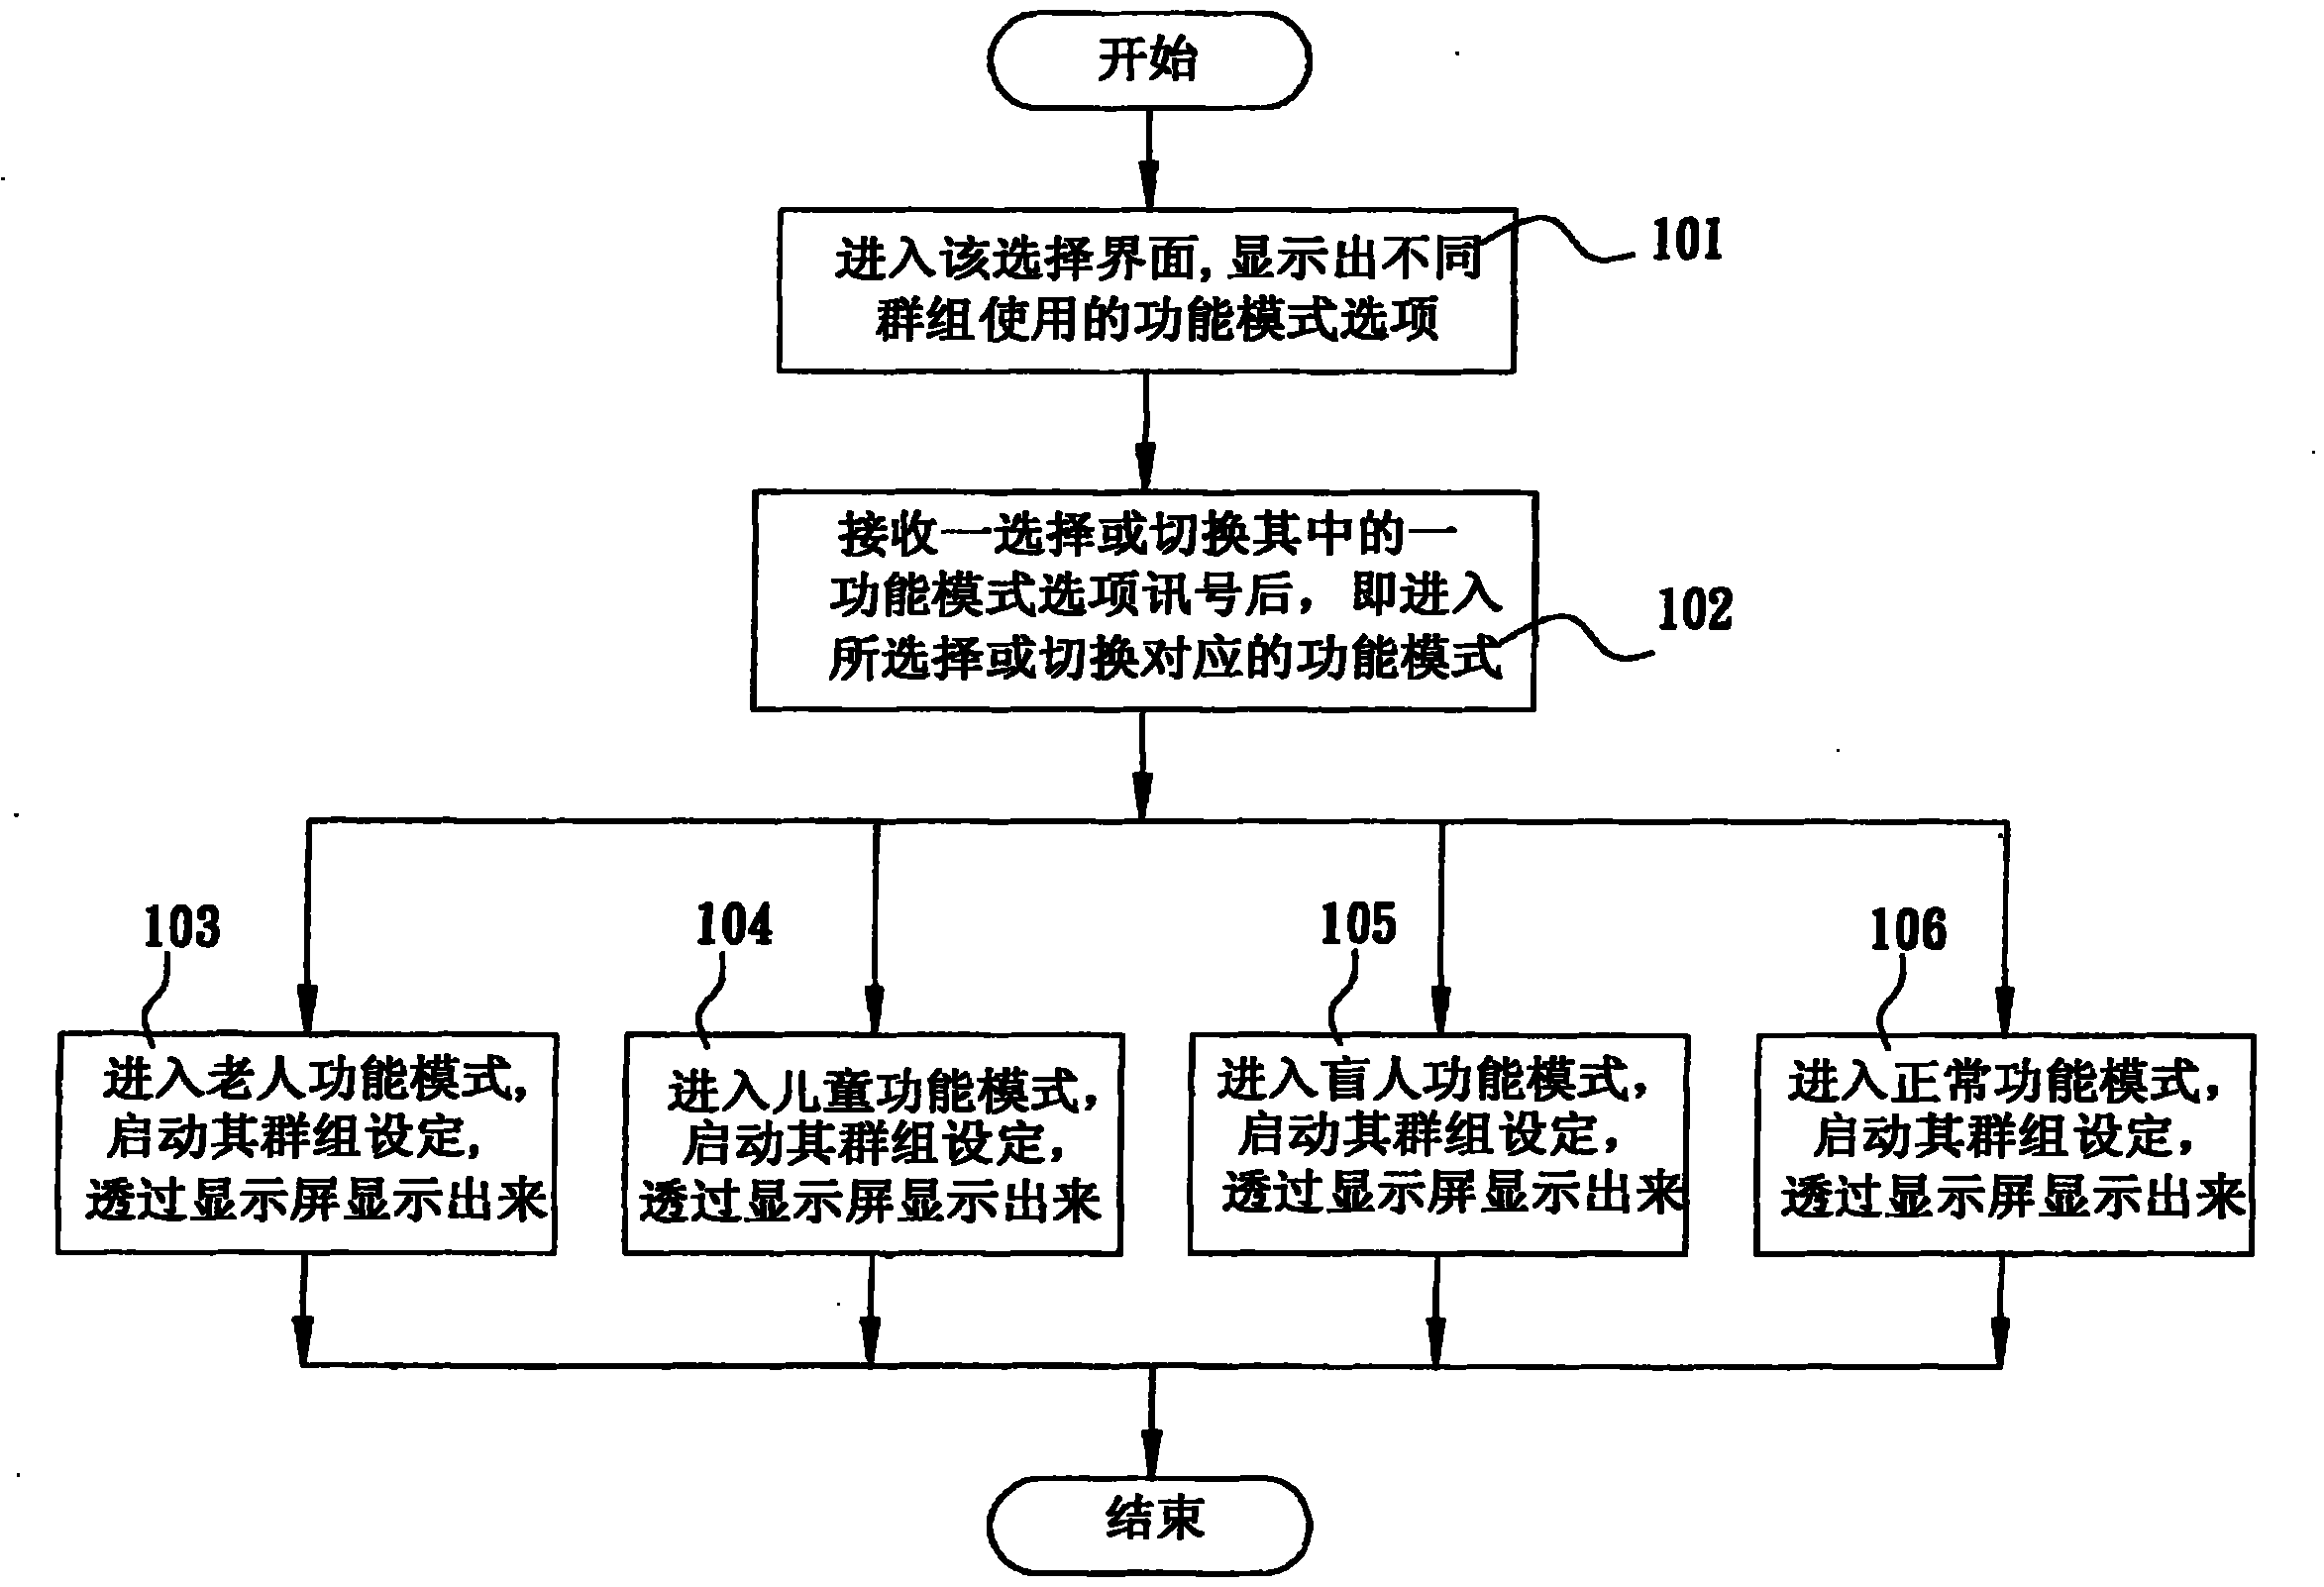 Functional mode switching method for providing different group use in cell phone